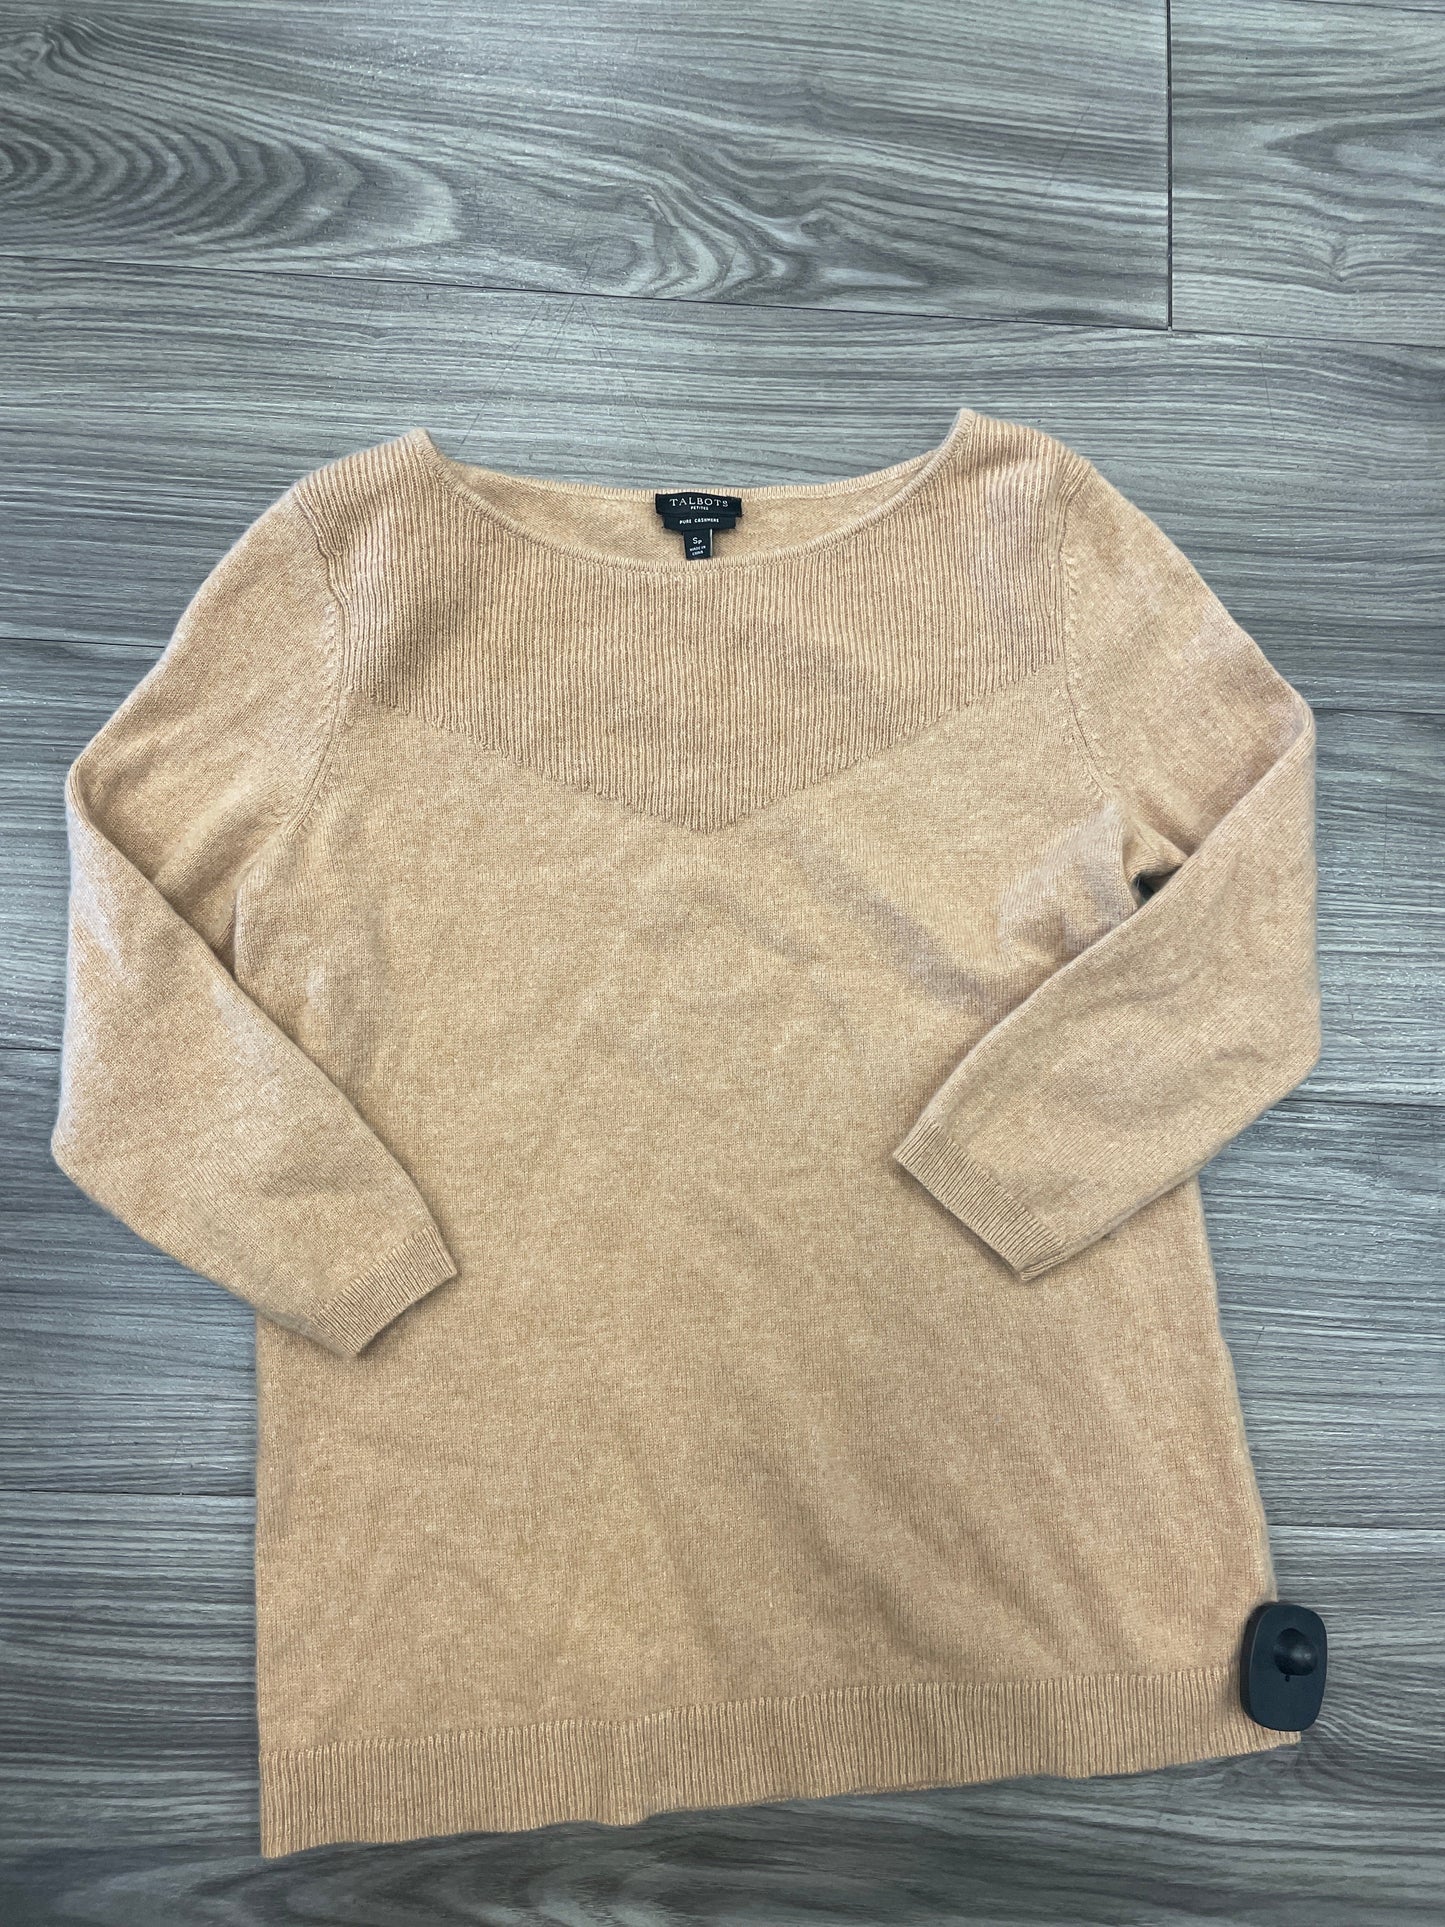 Brown Sweater Talbots, Size S